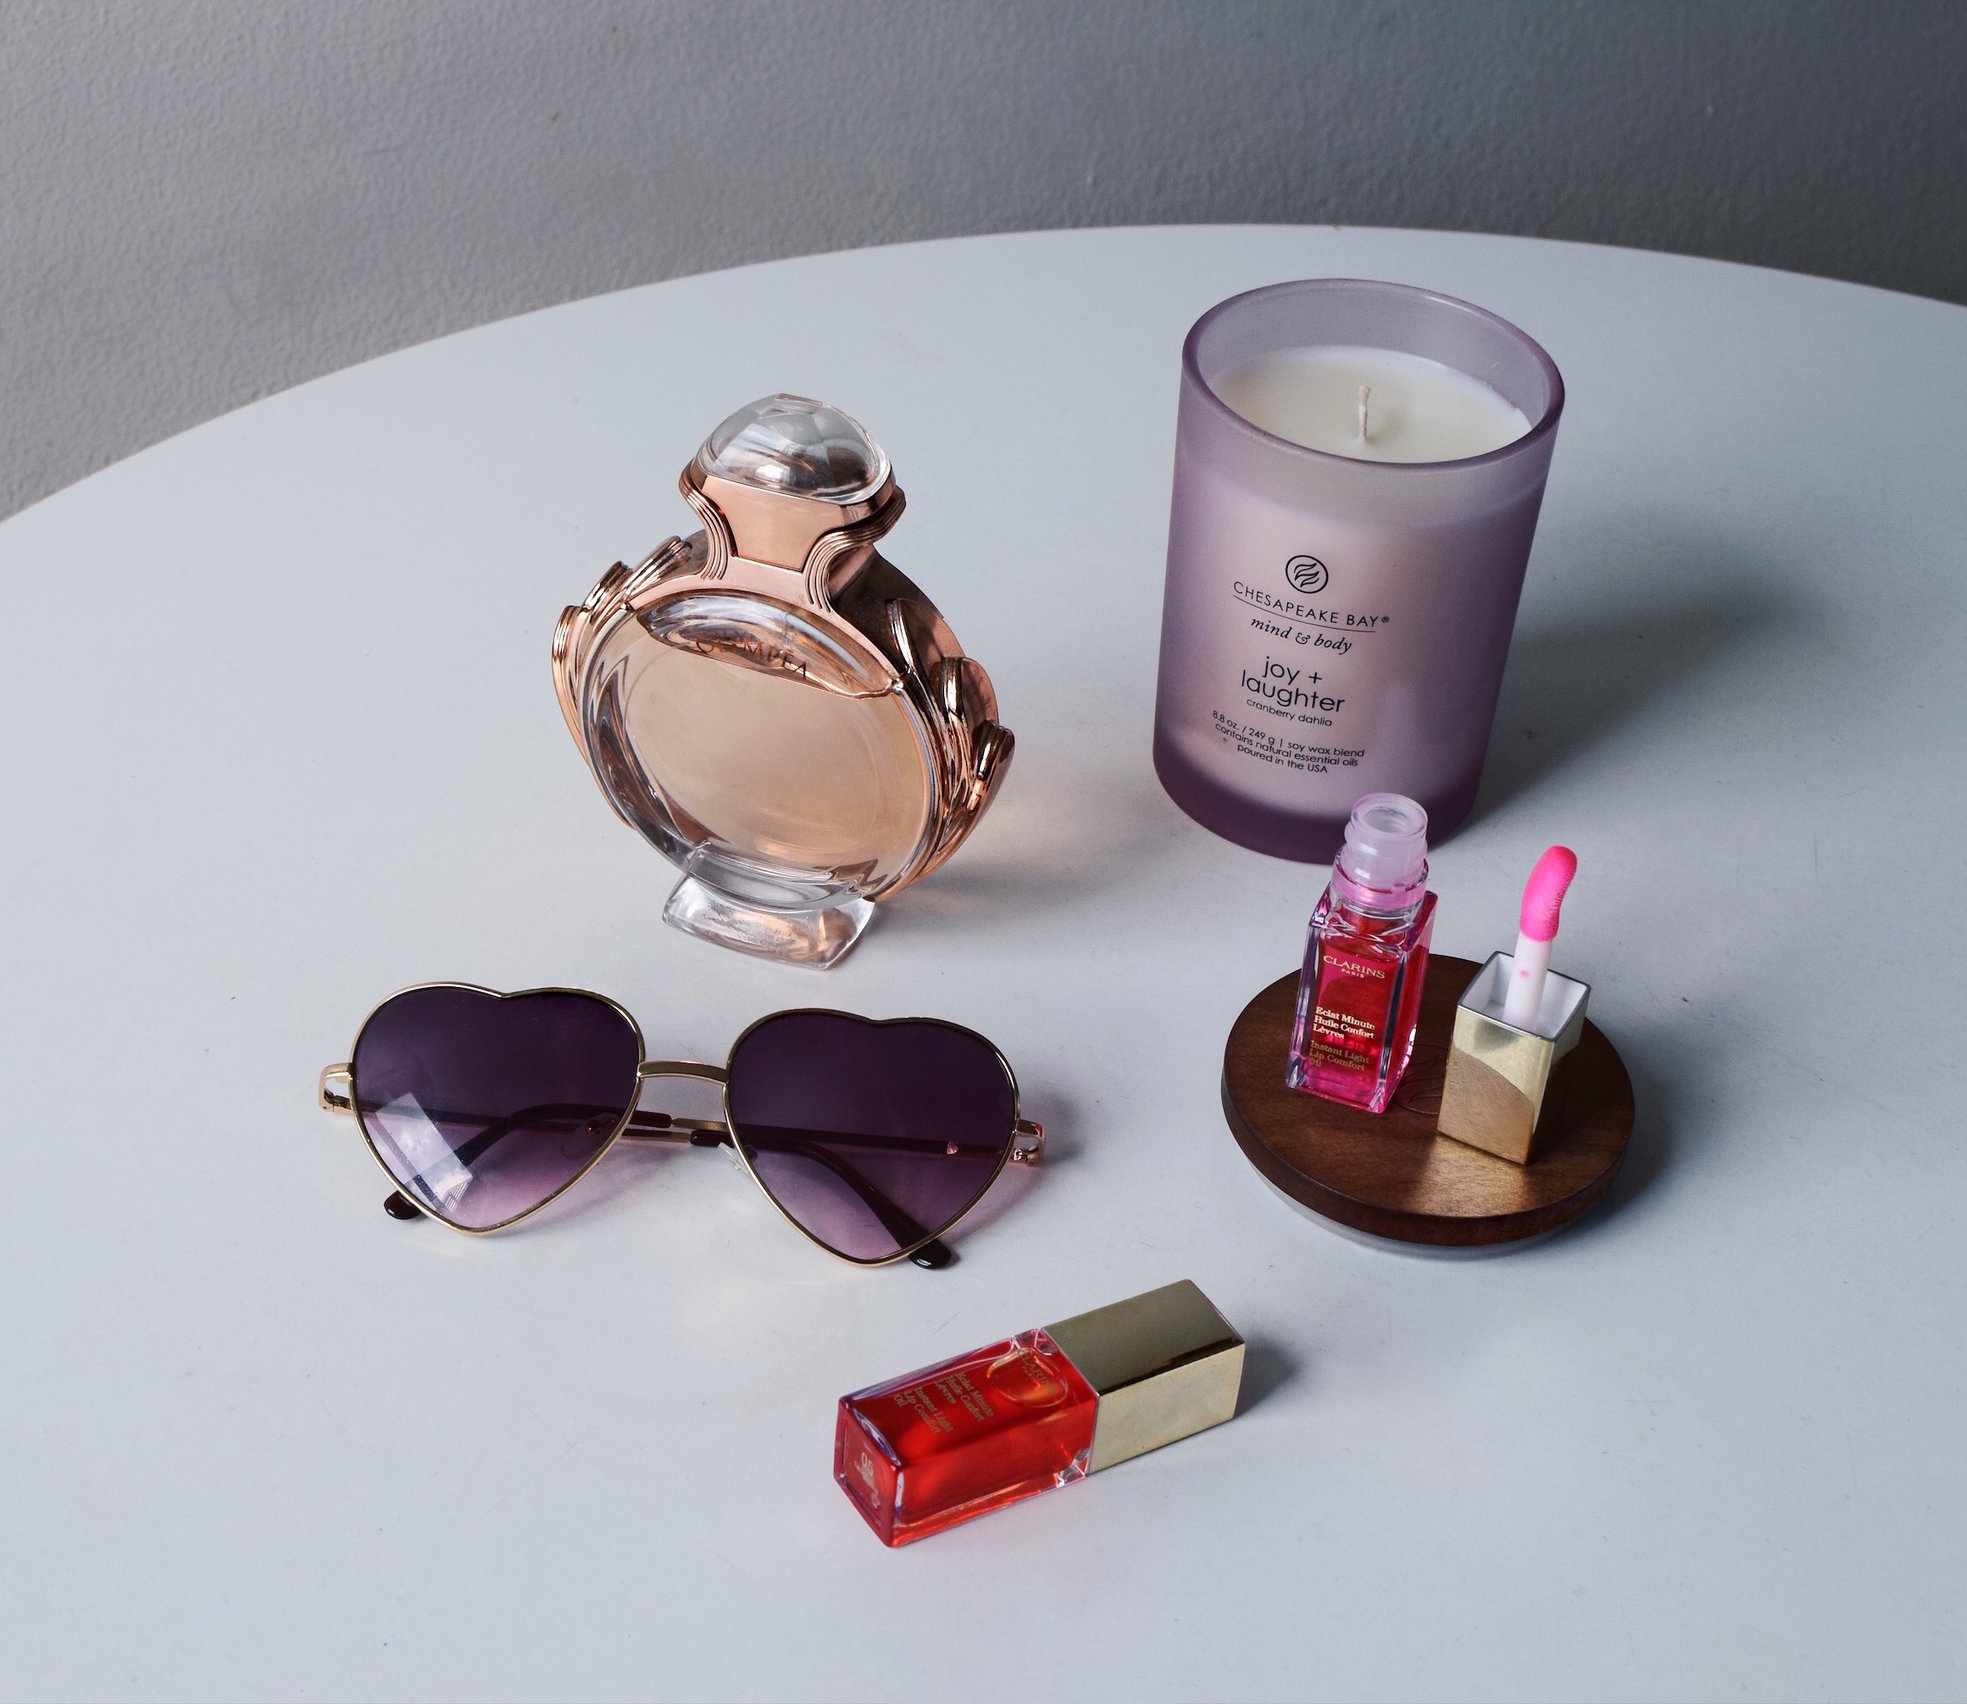 Softer Lips With Clarins Lip Oil Esther Santer Fashion Blog NYC Street Style Blogger Outfit OOTD Trendy Makeup Beauty Candle Flatlay Lipstick Color Shade Plumper Sunglasses Perfume Pretty Product Review Shop Girl Women Orange Tangerine Pink Candy Buy.JPG